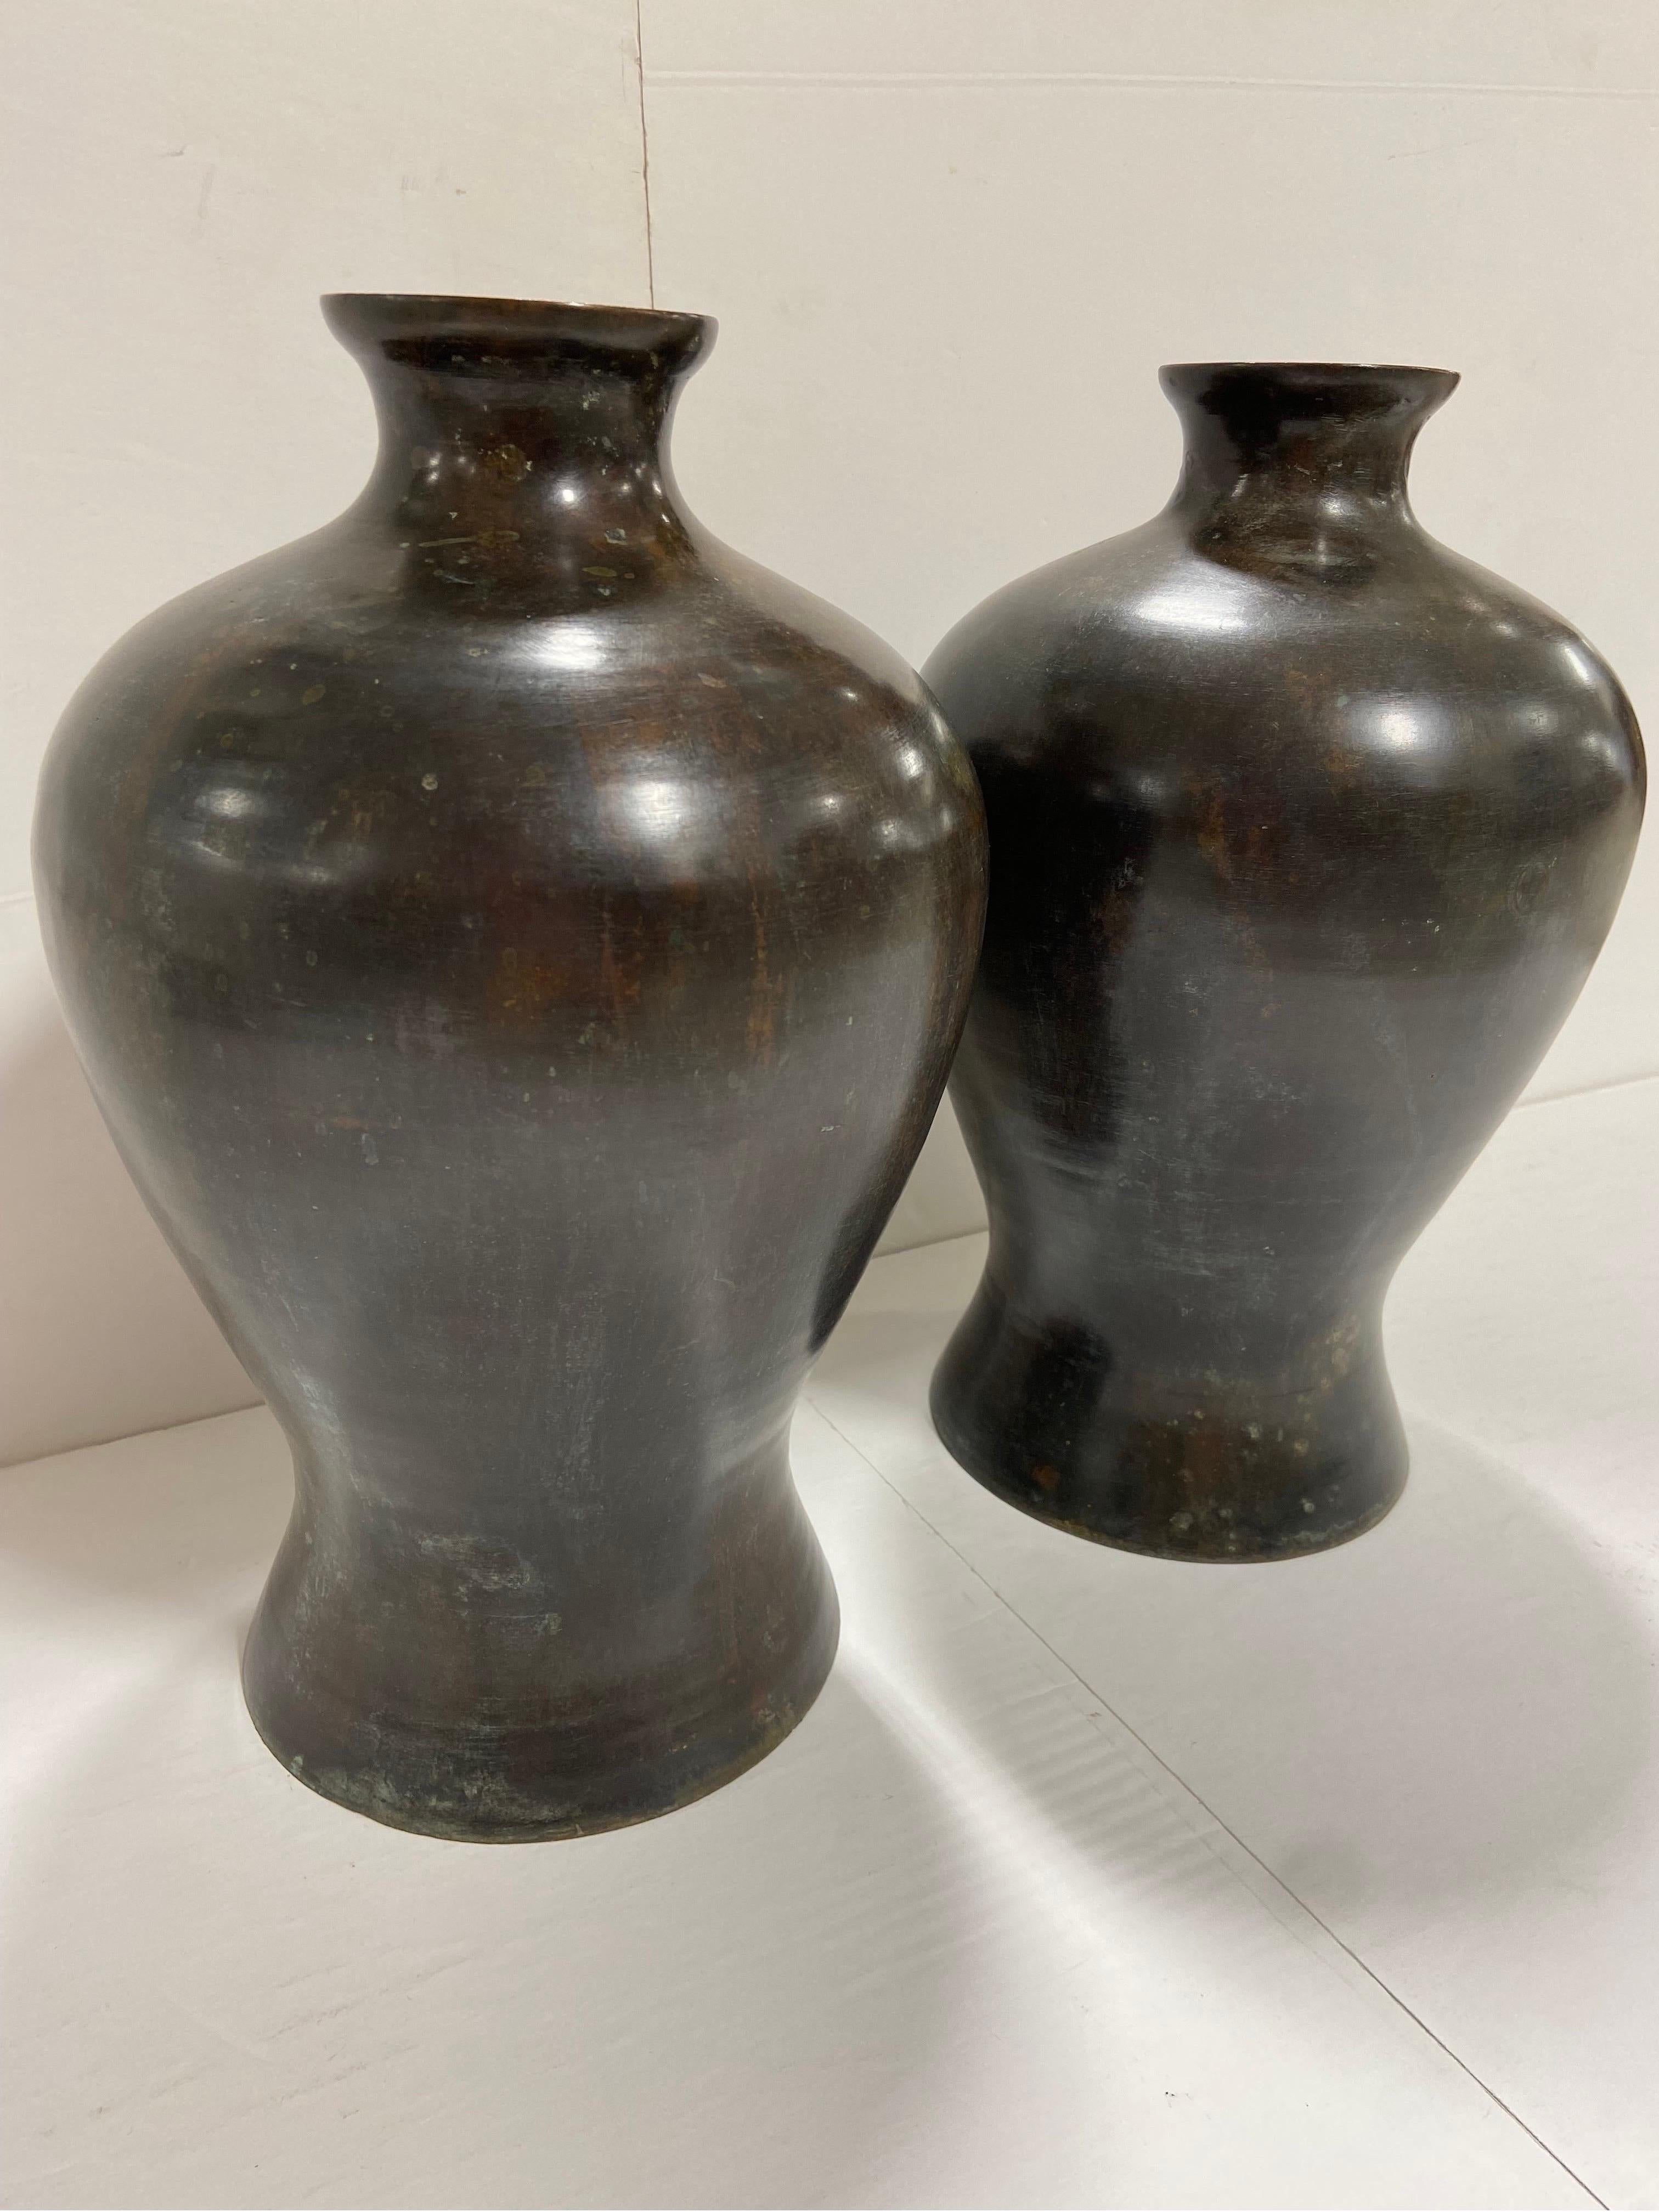 A vintage pair of bronze vases by Maitland Smith. Original labels are underneath. This pair is in the style of Japanese Meiji period bronze works of art. From the Maitland-Smith website, 